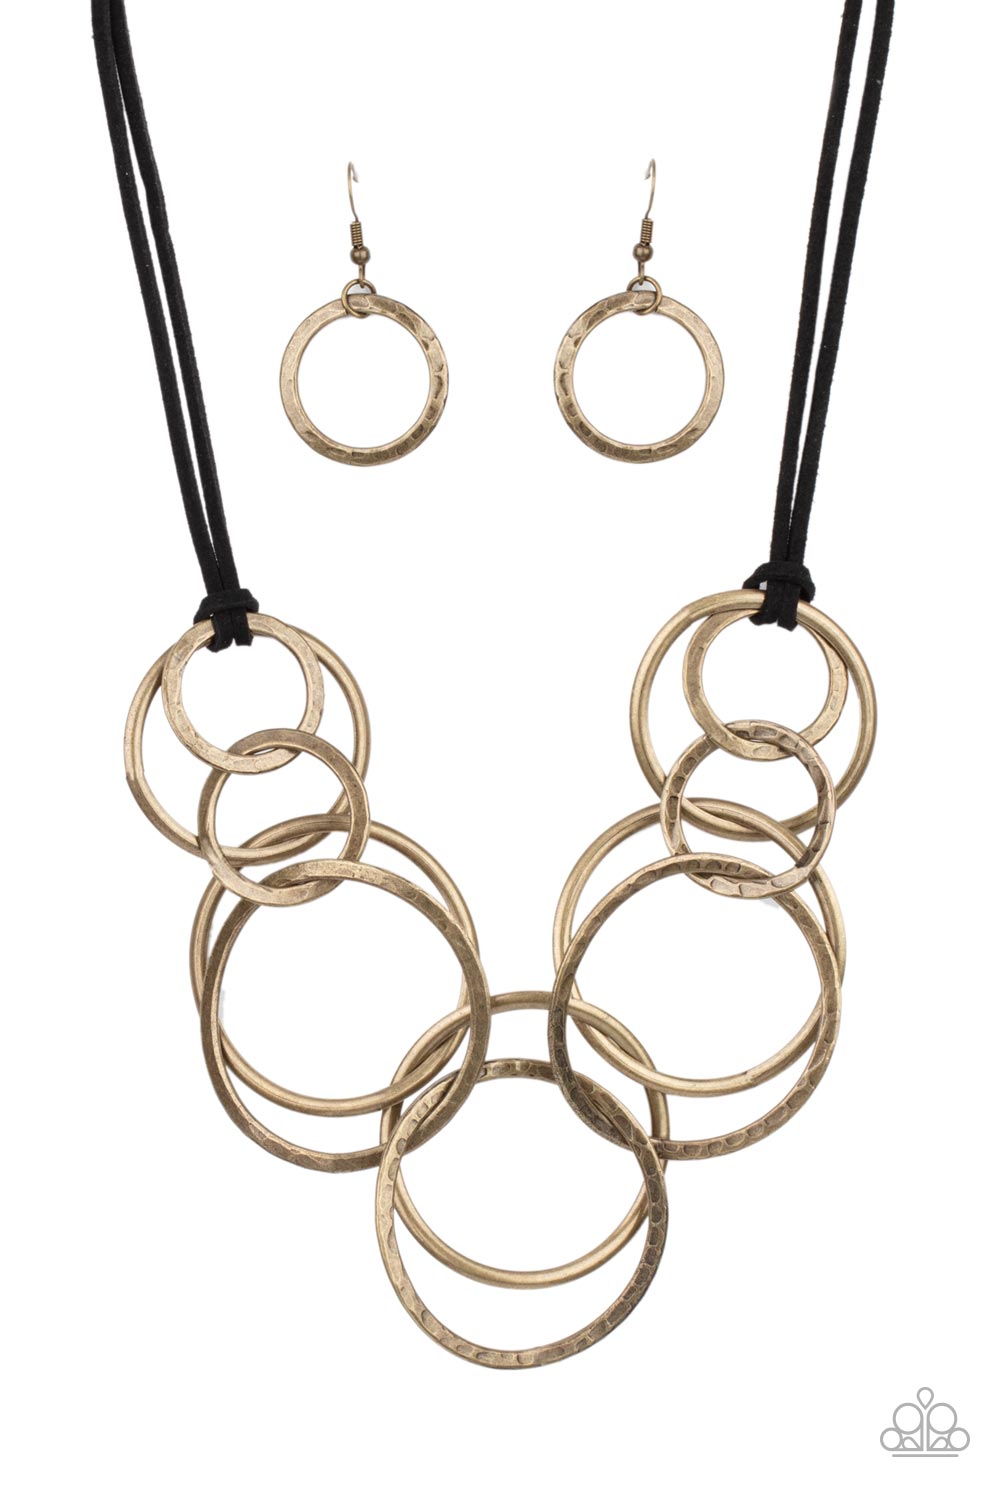 Spiraling Out of COUTURE Brass Necklace - Paparazzi Accessories  Black suede cords knot around a mismatched assortment of hammered rustic brass rings that interlock below the collar, creating two rows of dizzying texture. Features an adjustable clasp closure.  All Paparazzi Accessories are lead free and nickel free!  Sold as one individual necklace. Includes one pair of matching earrings.